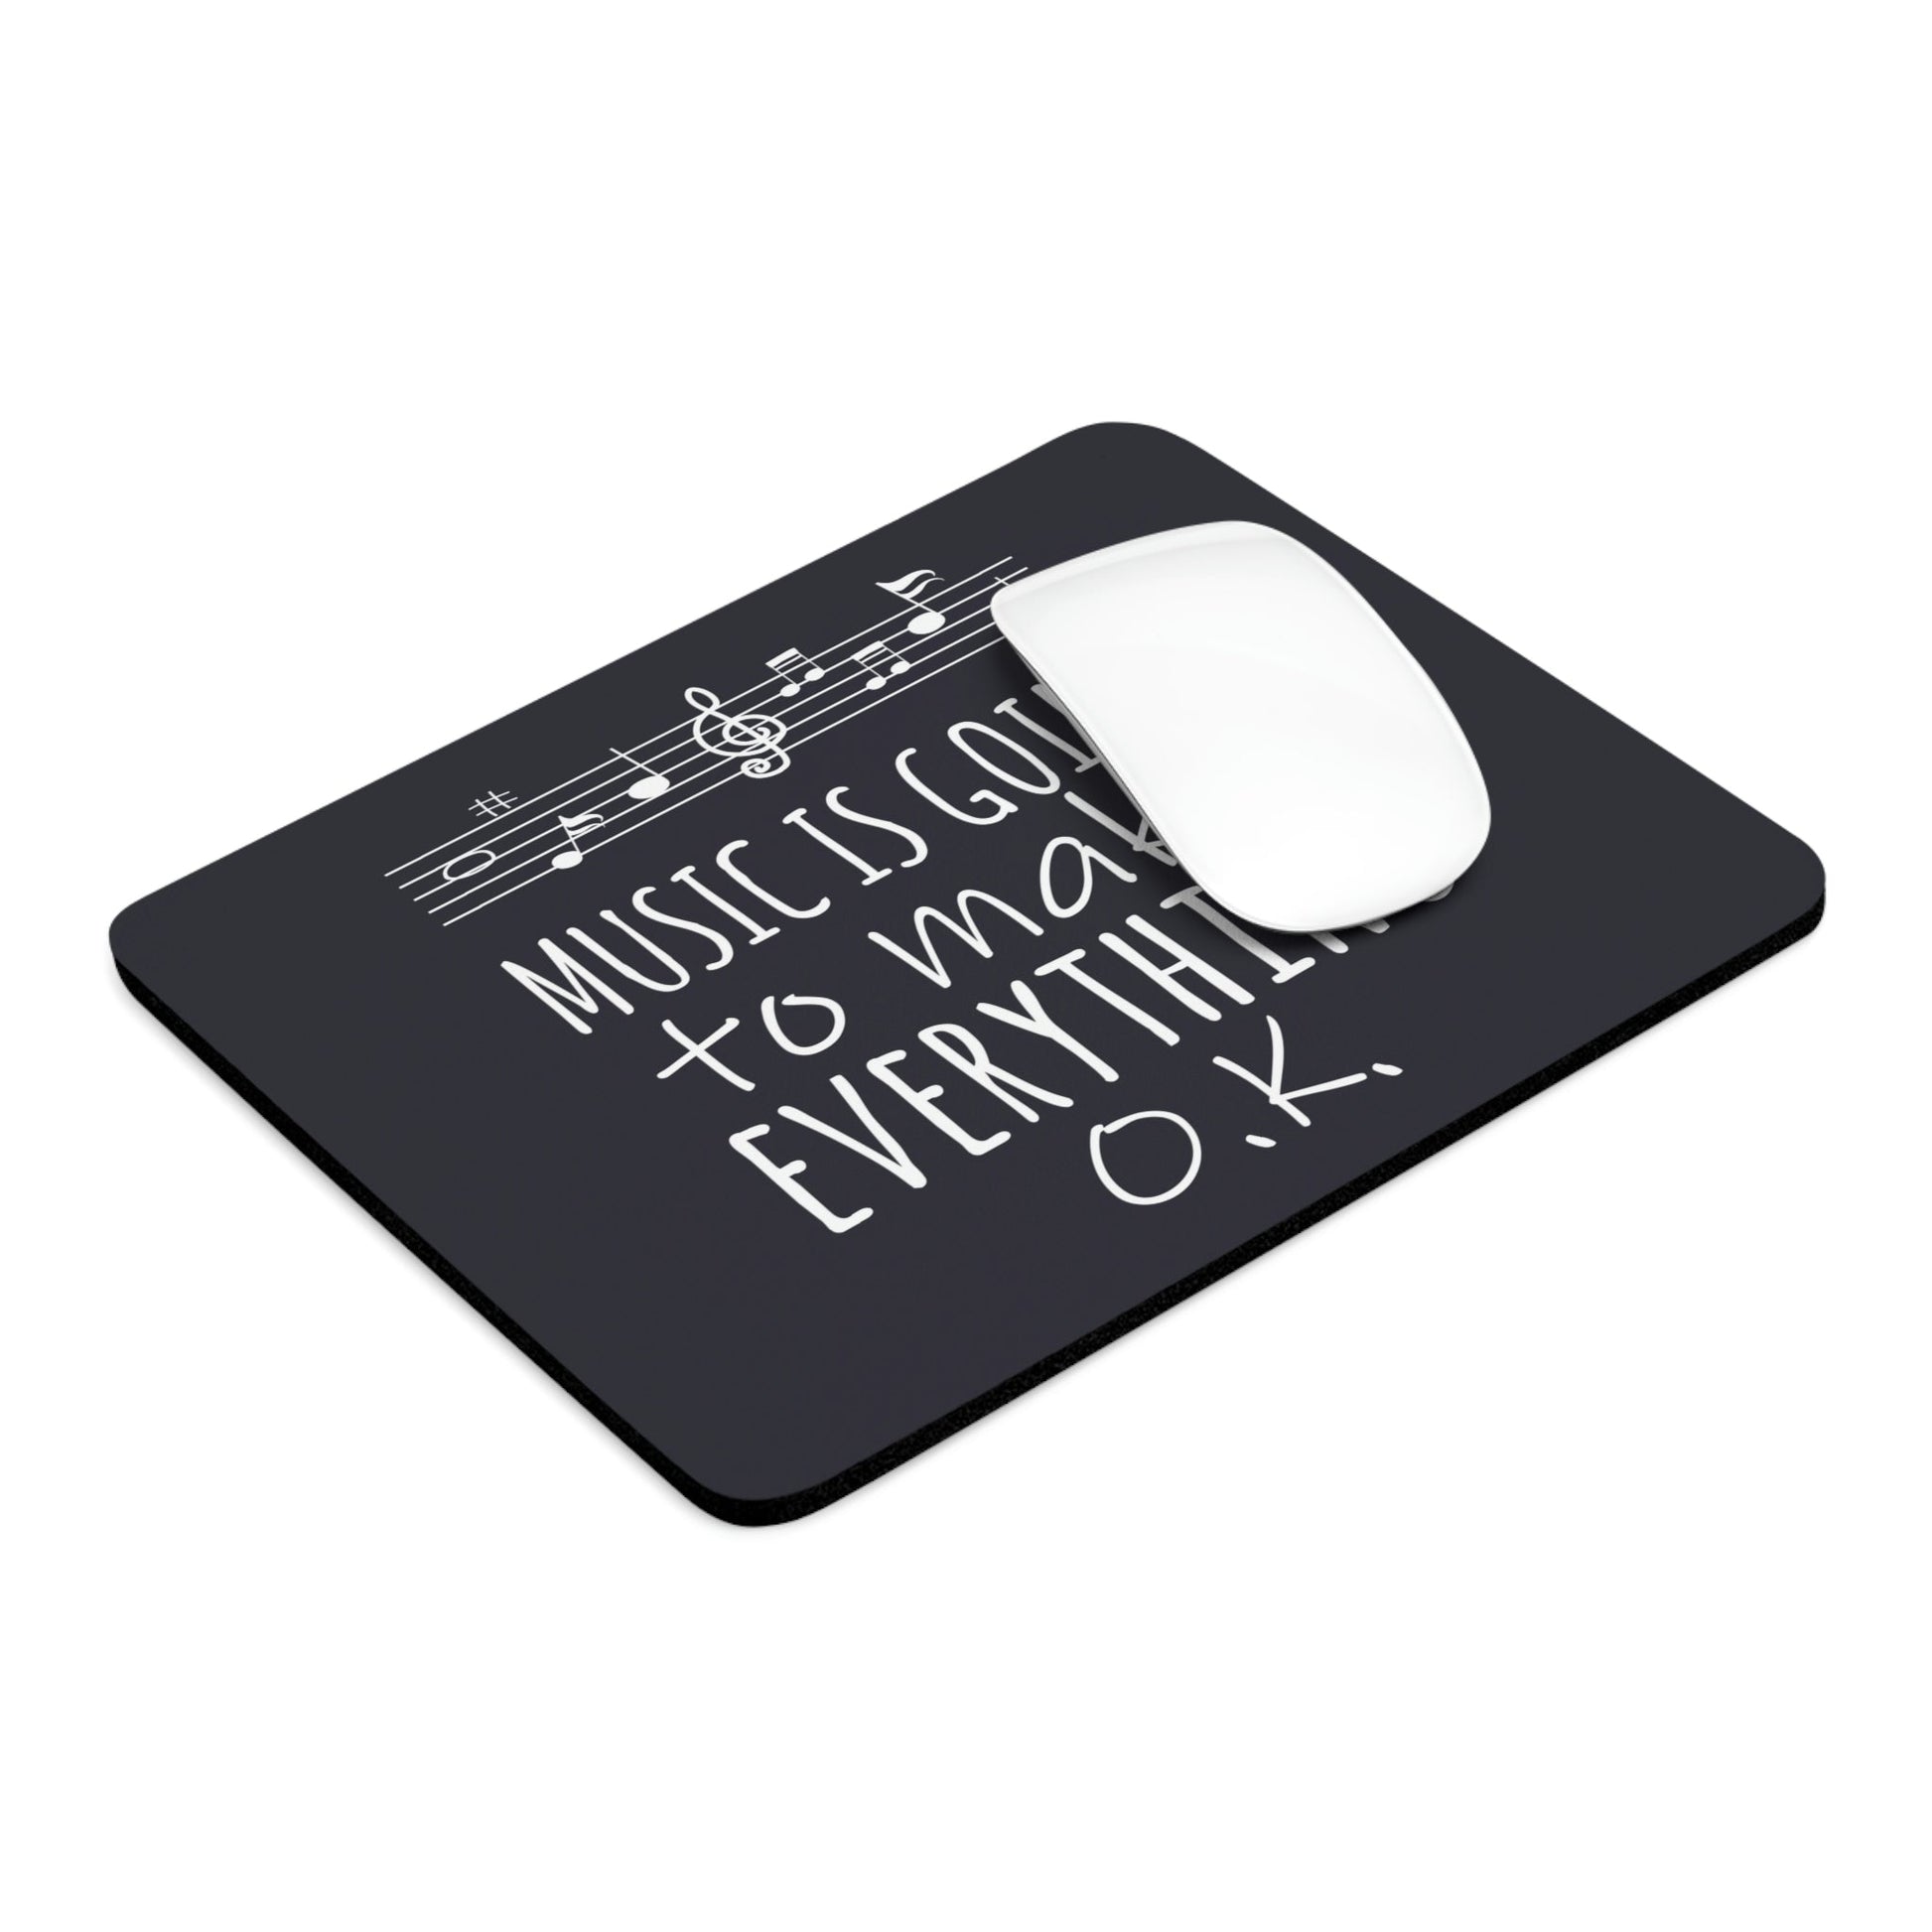 Music Is Going To Make Everything Ok Music Quotes Ergonomic Non-slip Creative Design Mouse Pad Ichaku [Perfect Gifts Selection]